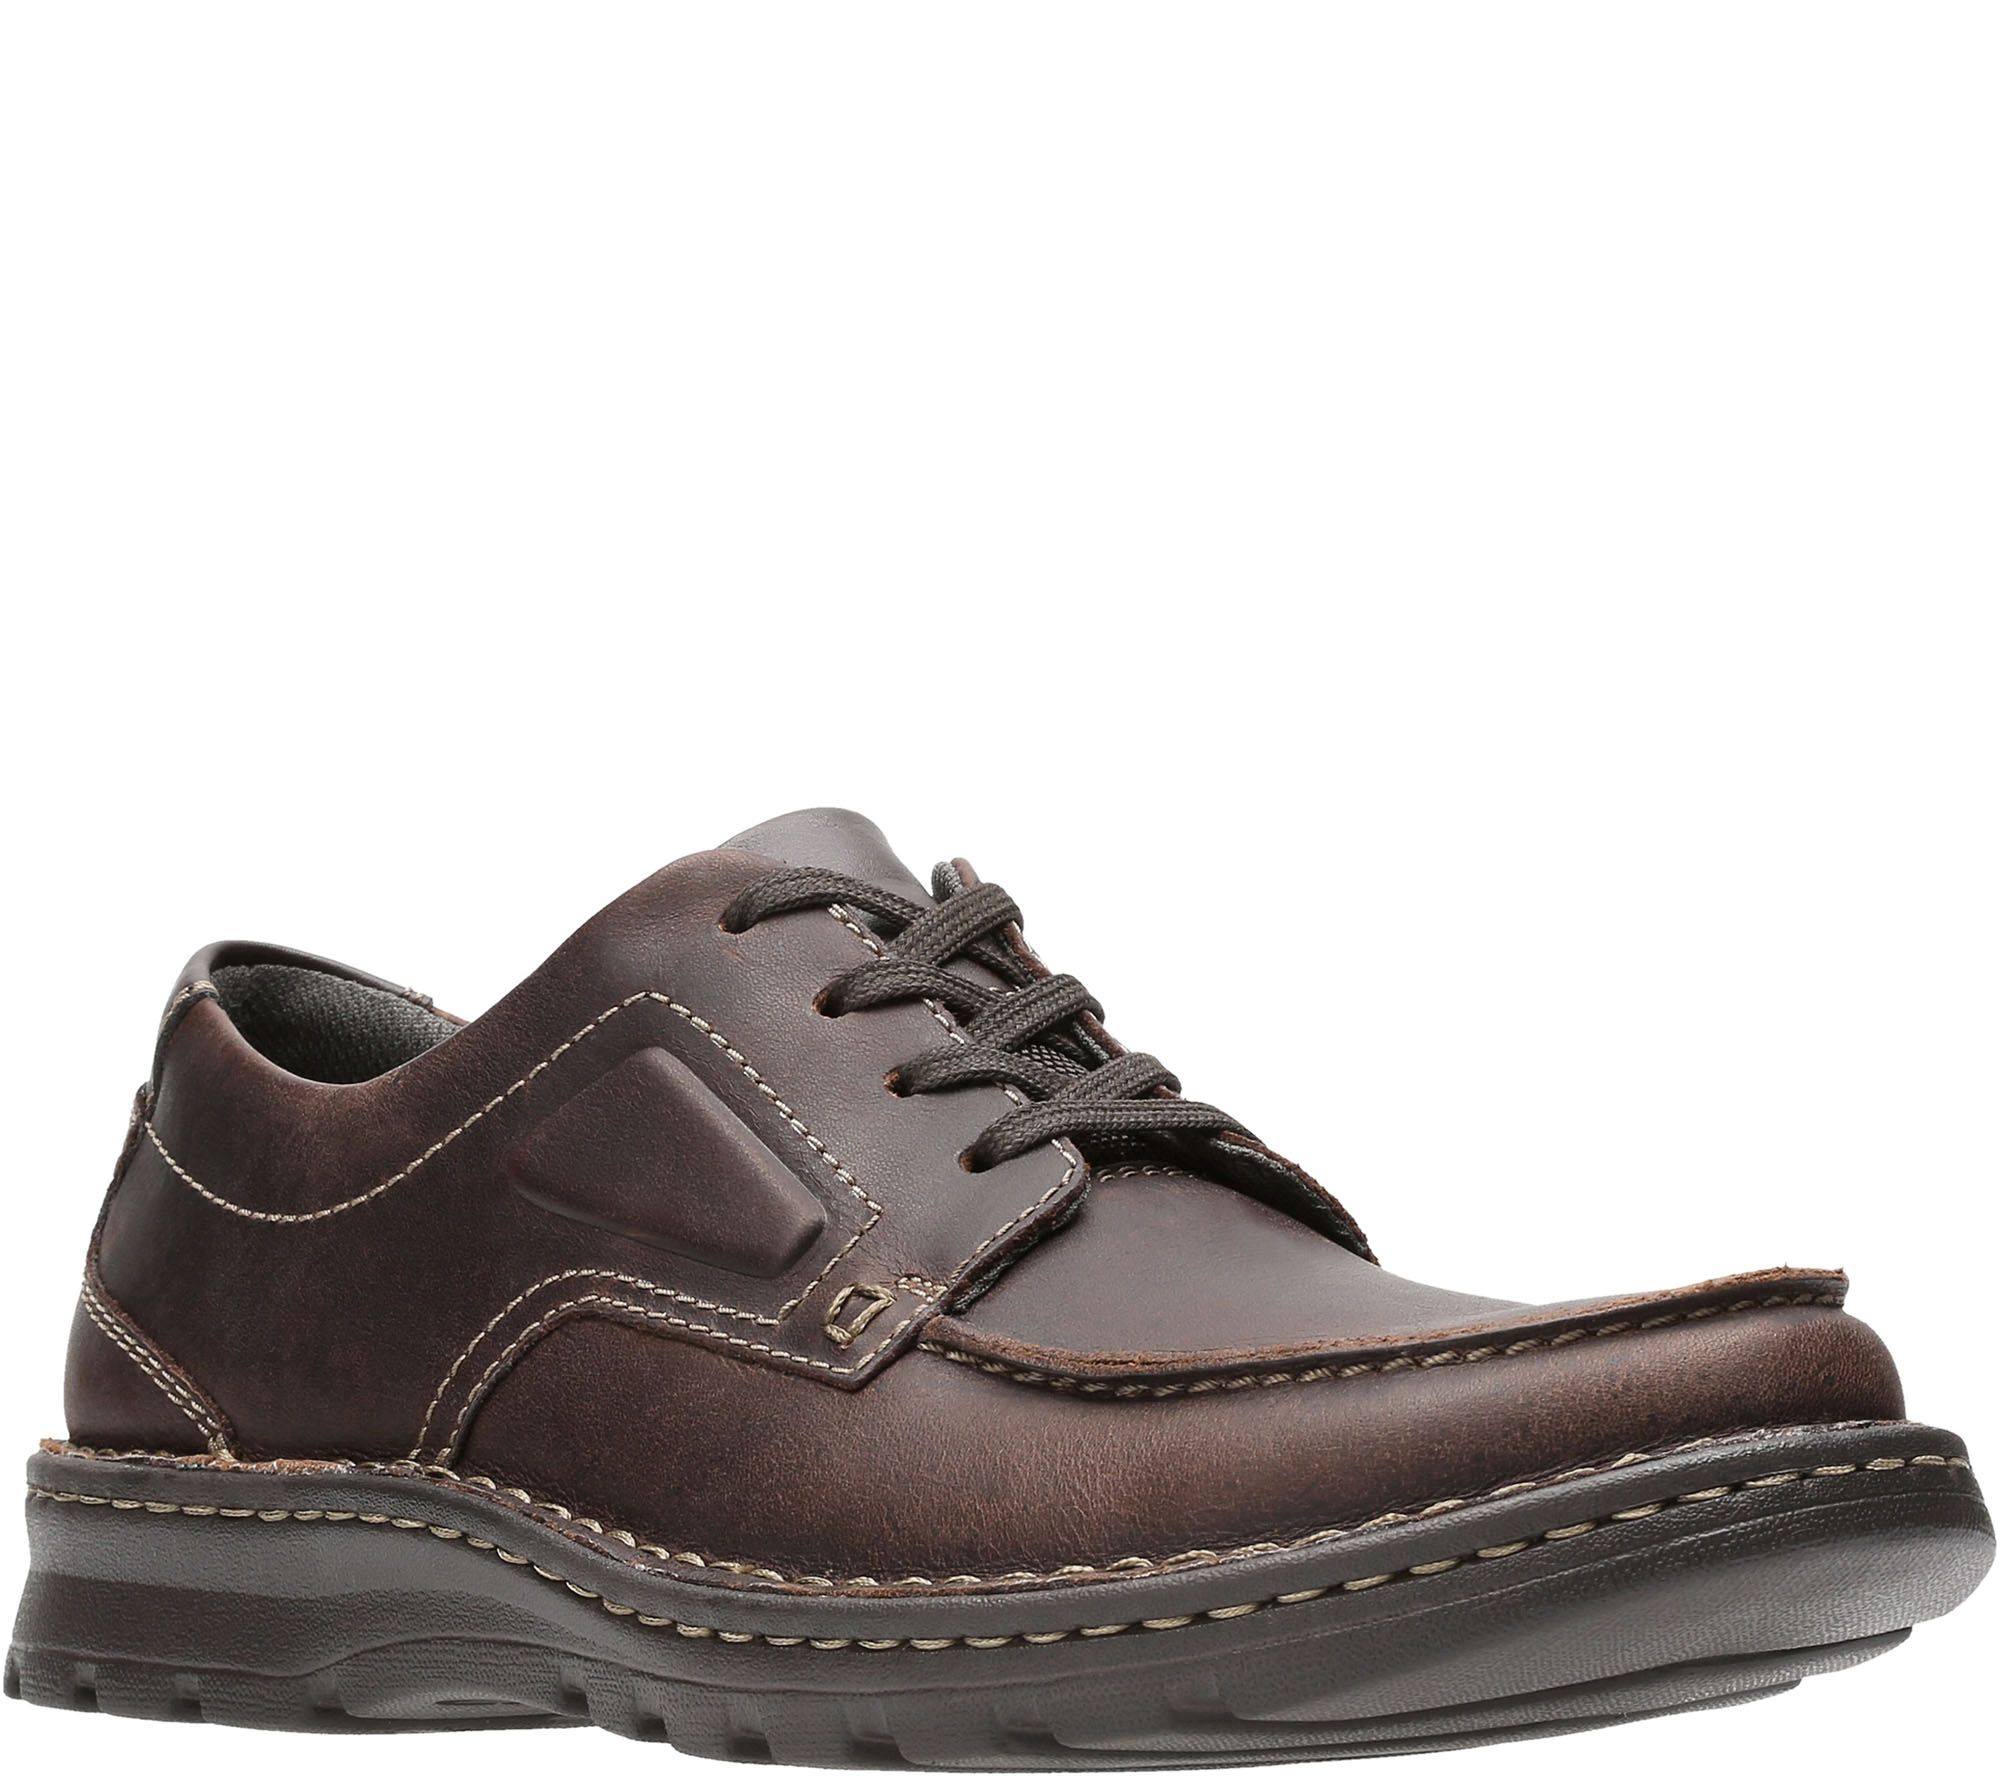 clarks leather lace up shoes ashland pearl